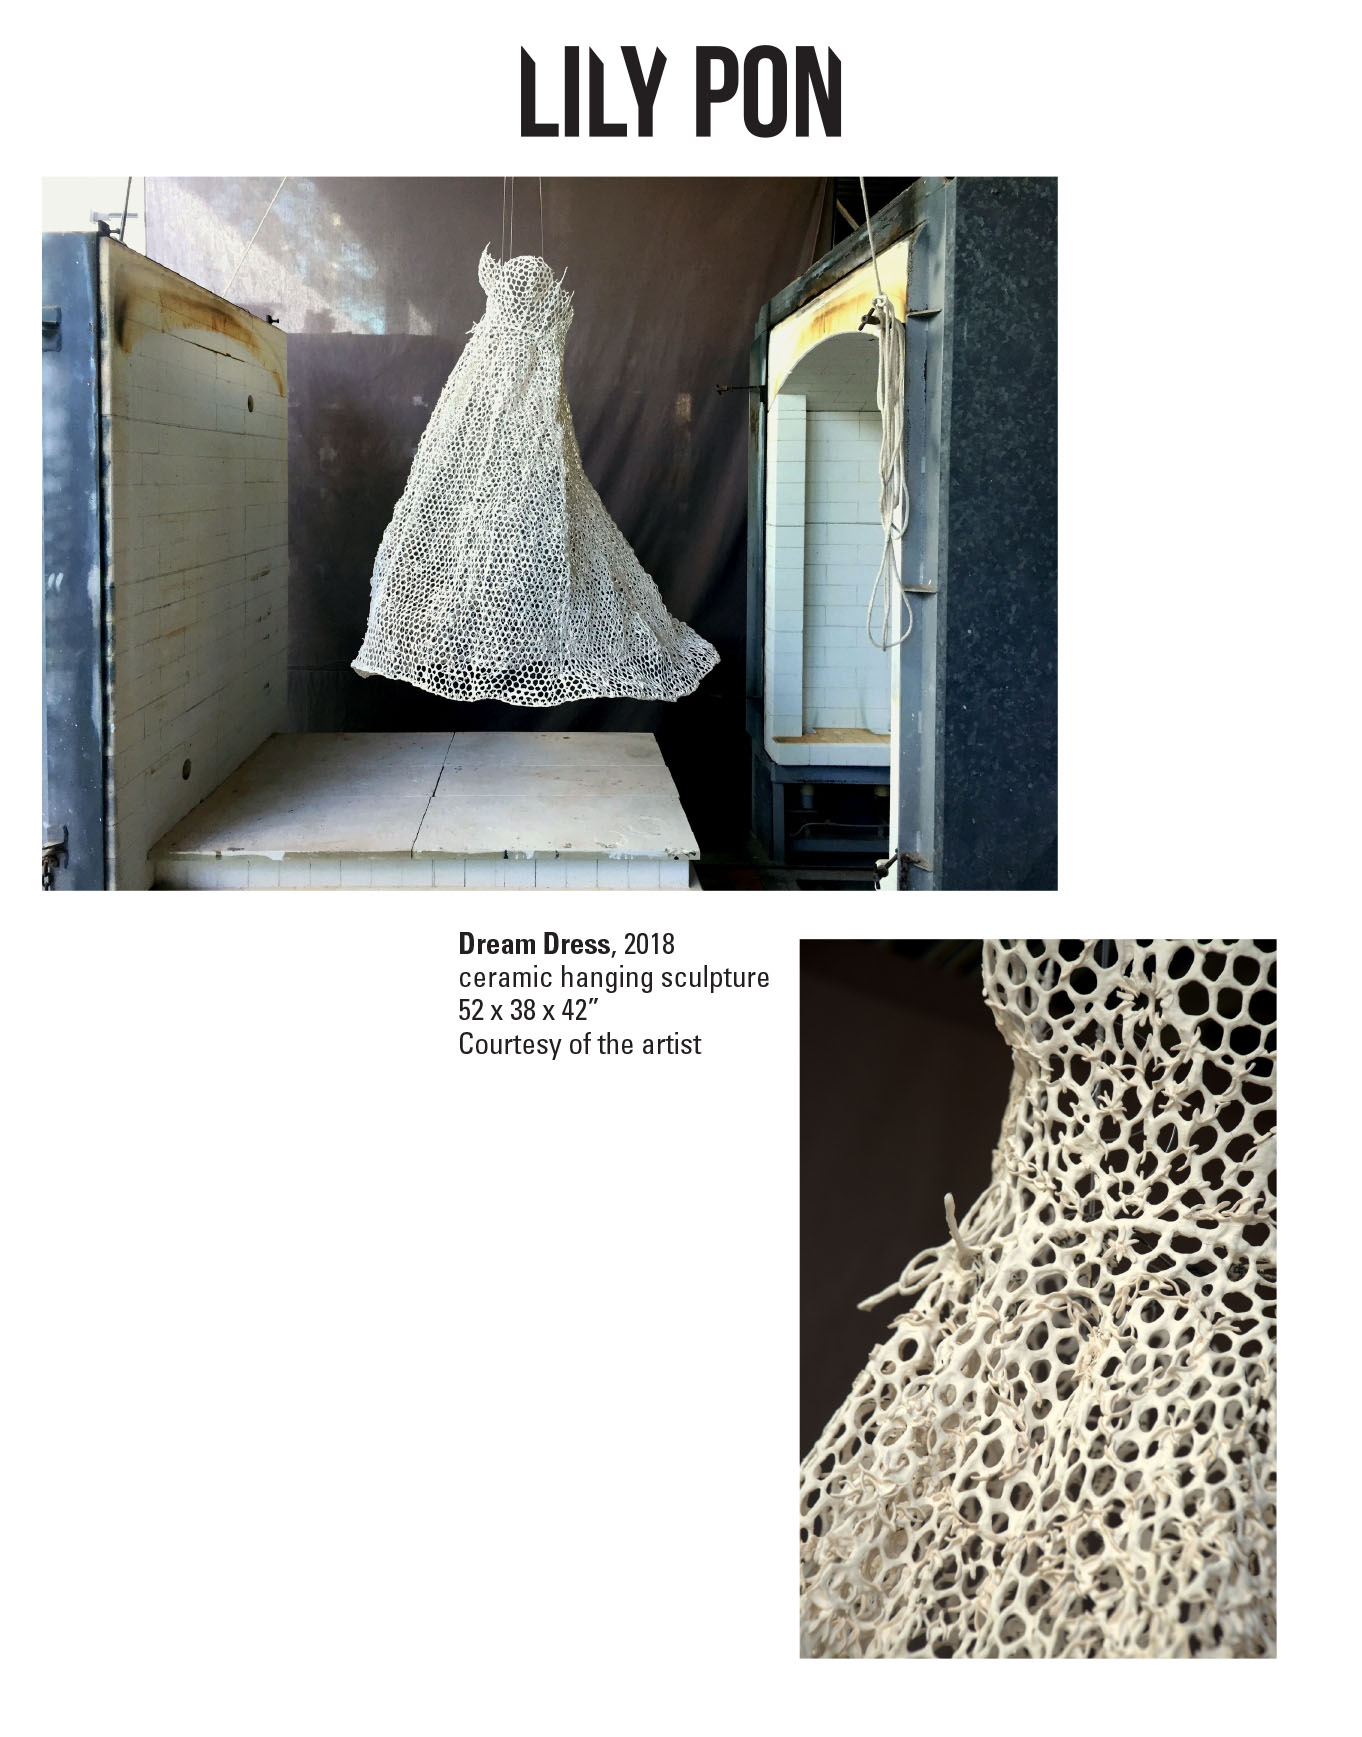 Lily Pon, Dream Dress, 2018. Ceramic hanging sculpture. 52 x 38 x 42” Courtesy of the artist. A hanging sculpture of a white dress with holes that have a web-like structure